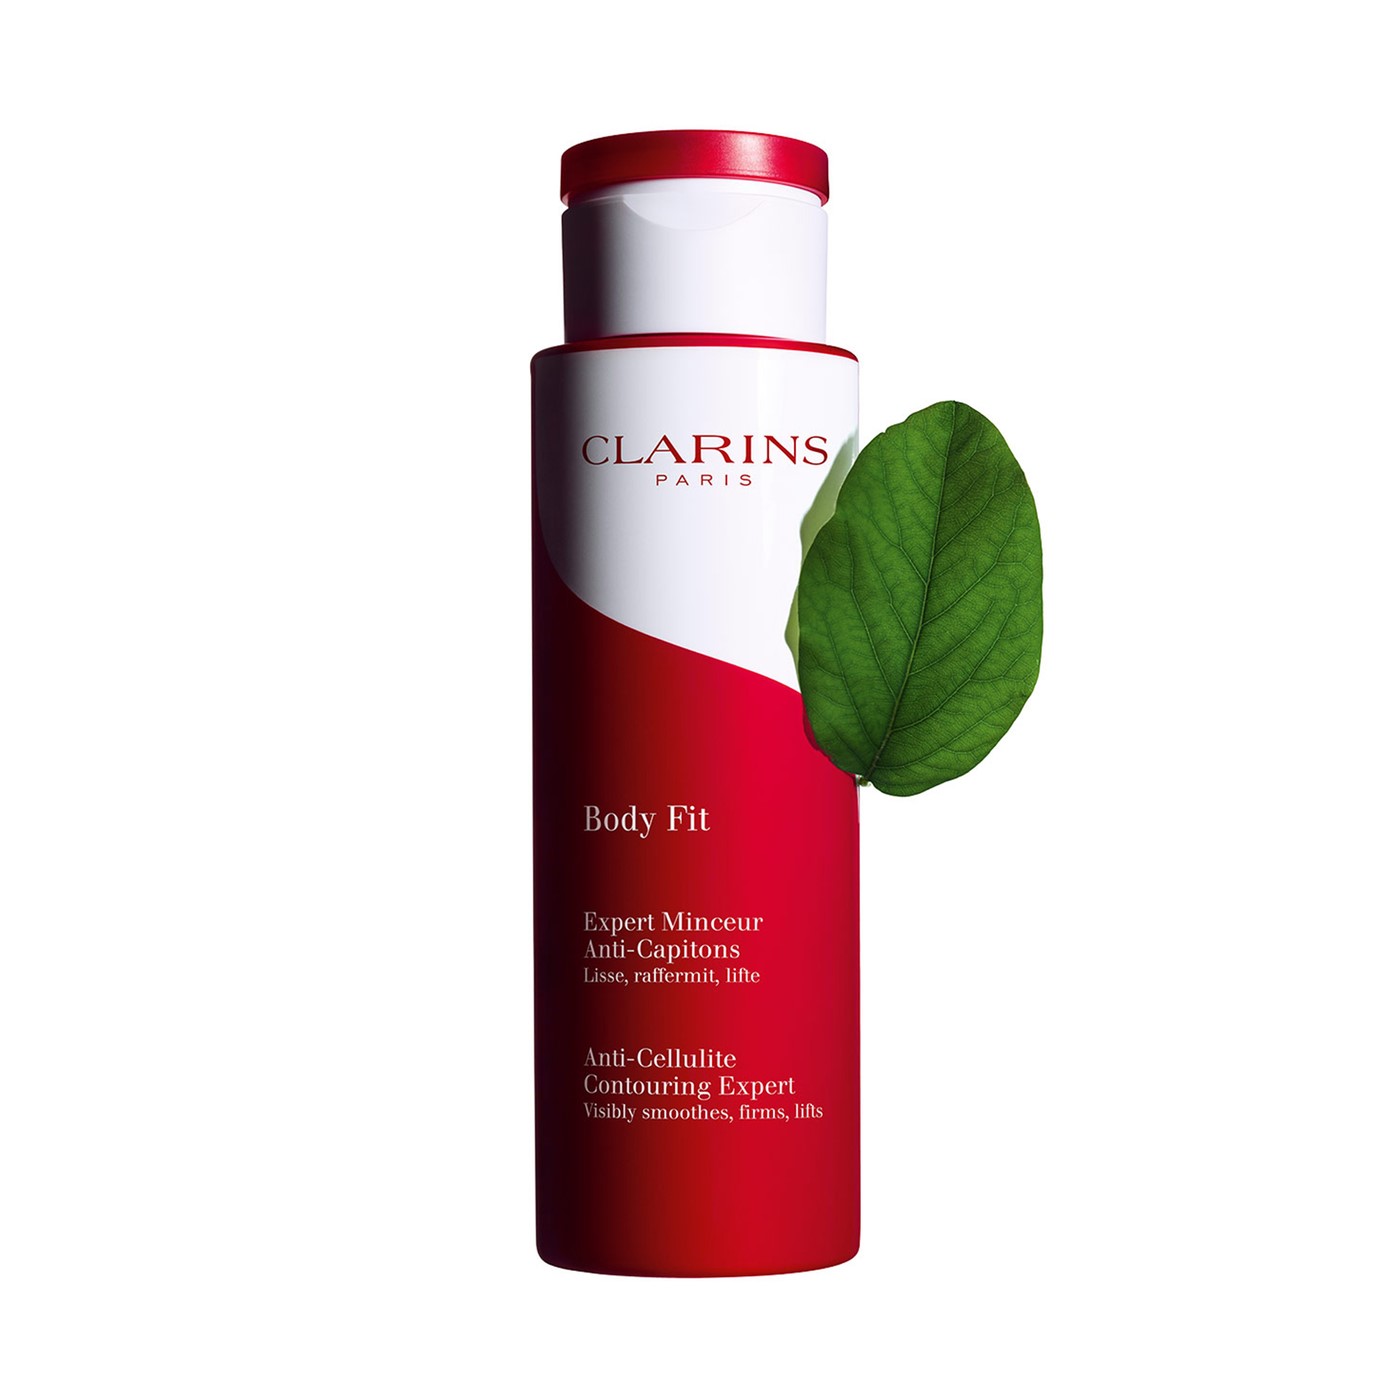 CLARINS Body Fit - Reviews